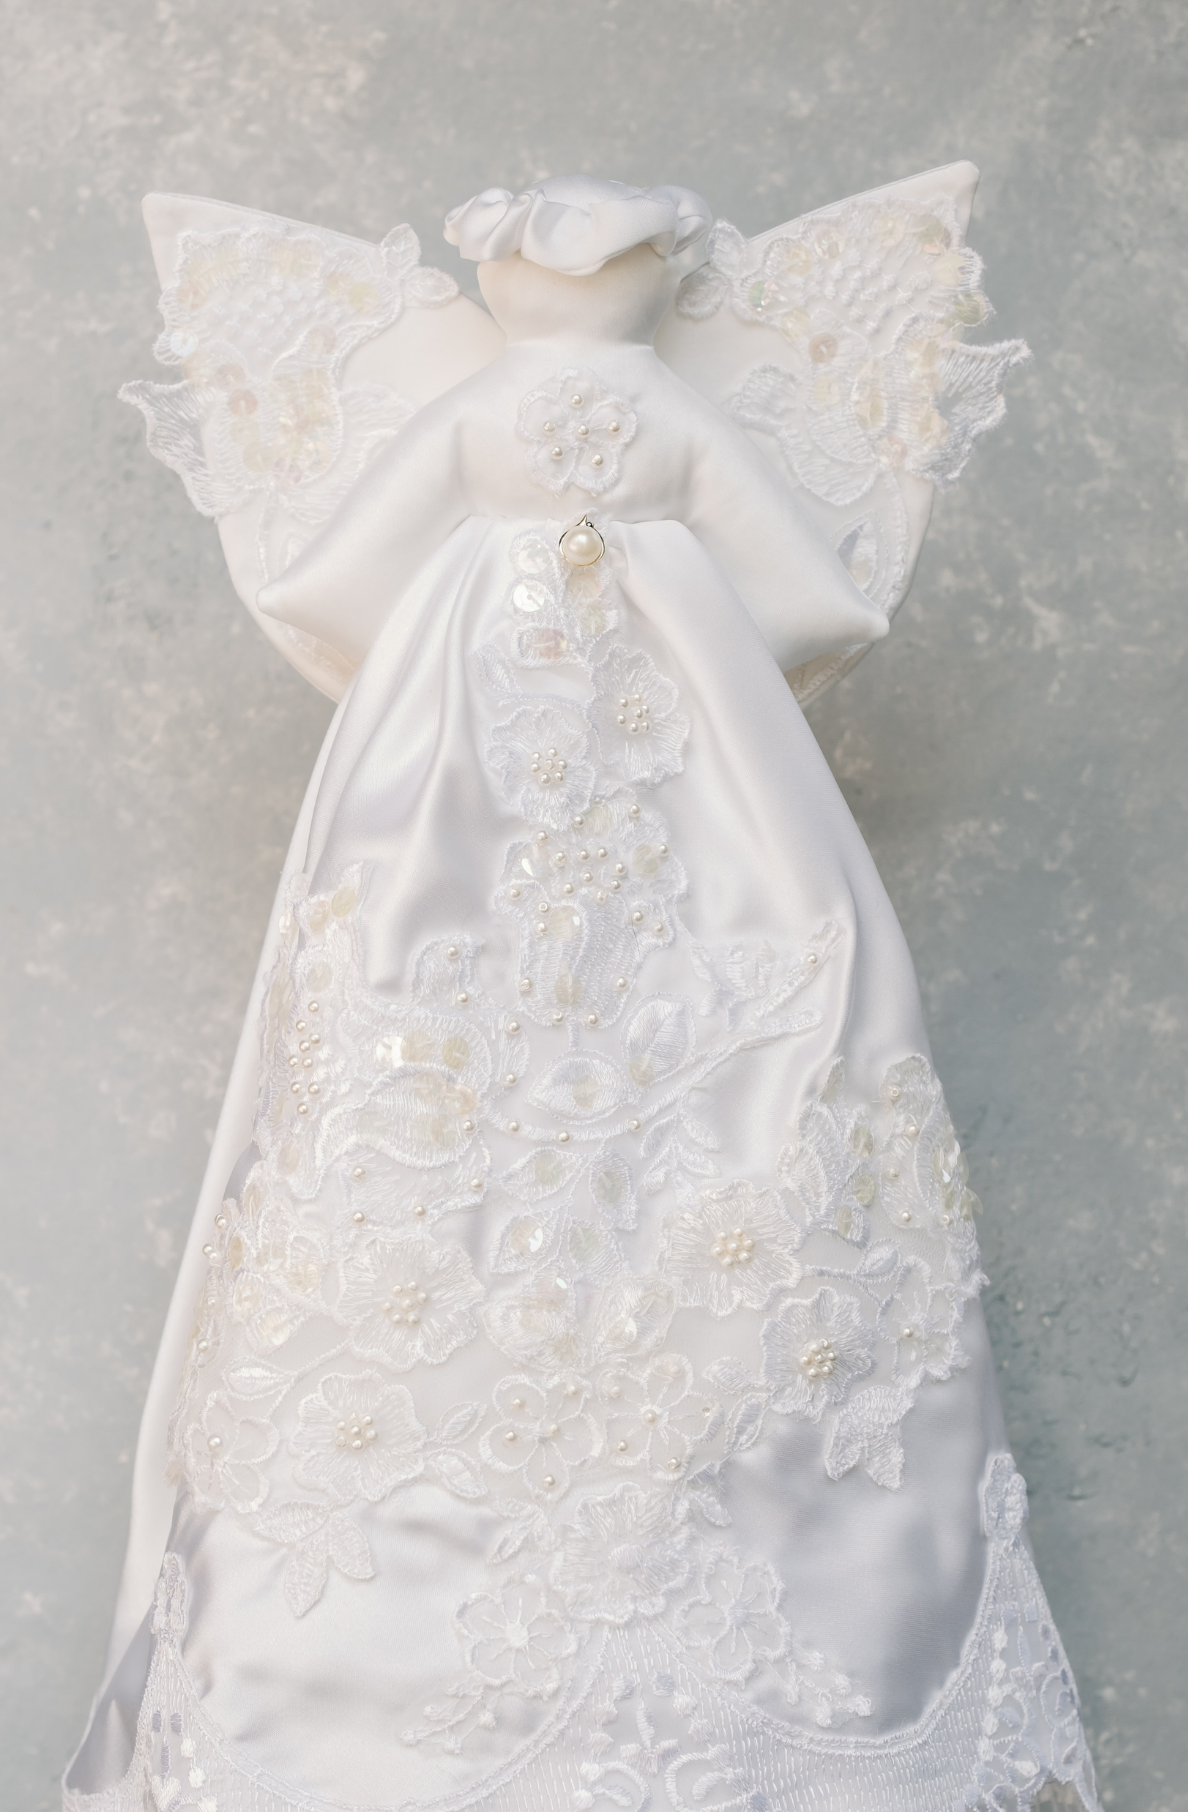 Star Lace Baby Girl Christening Gown with Bonnet – Carriage Boutique